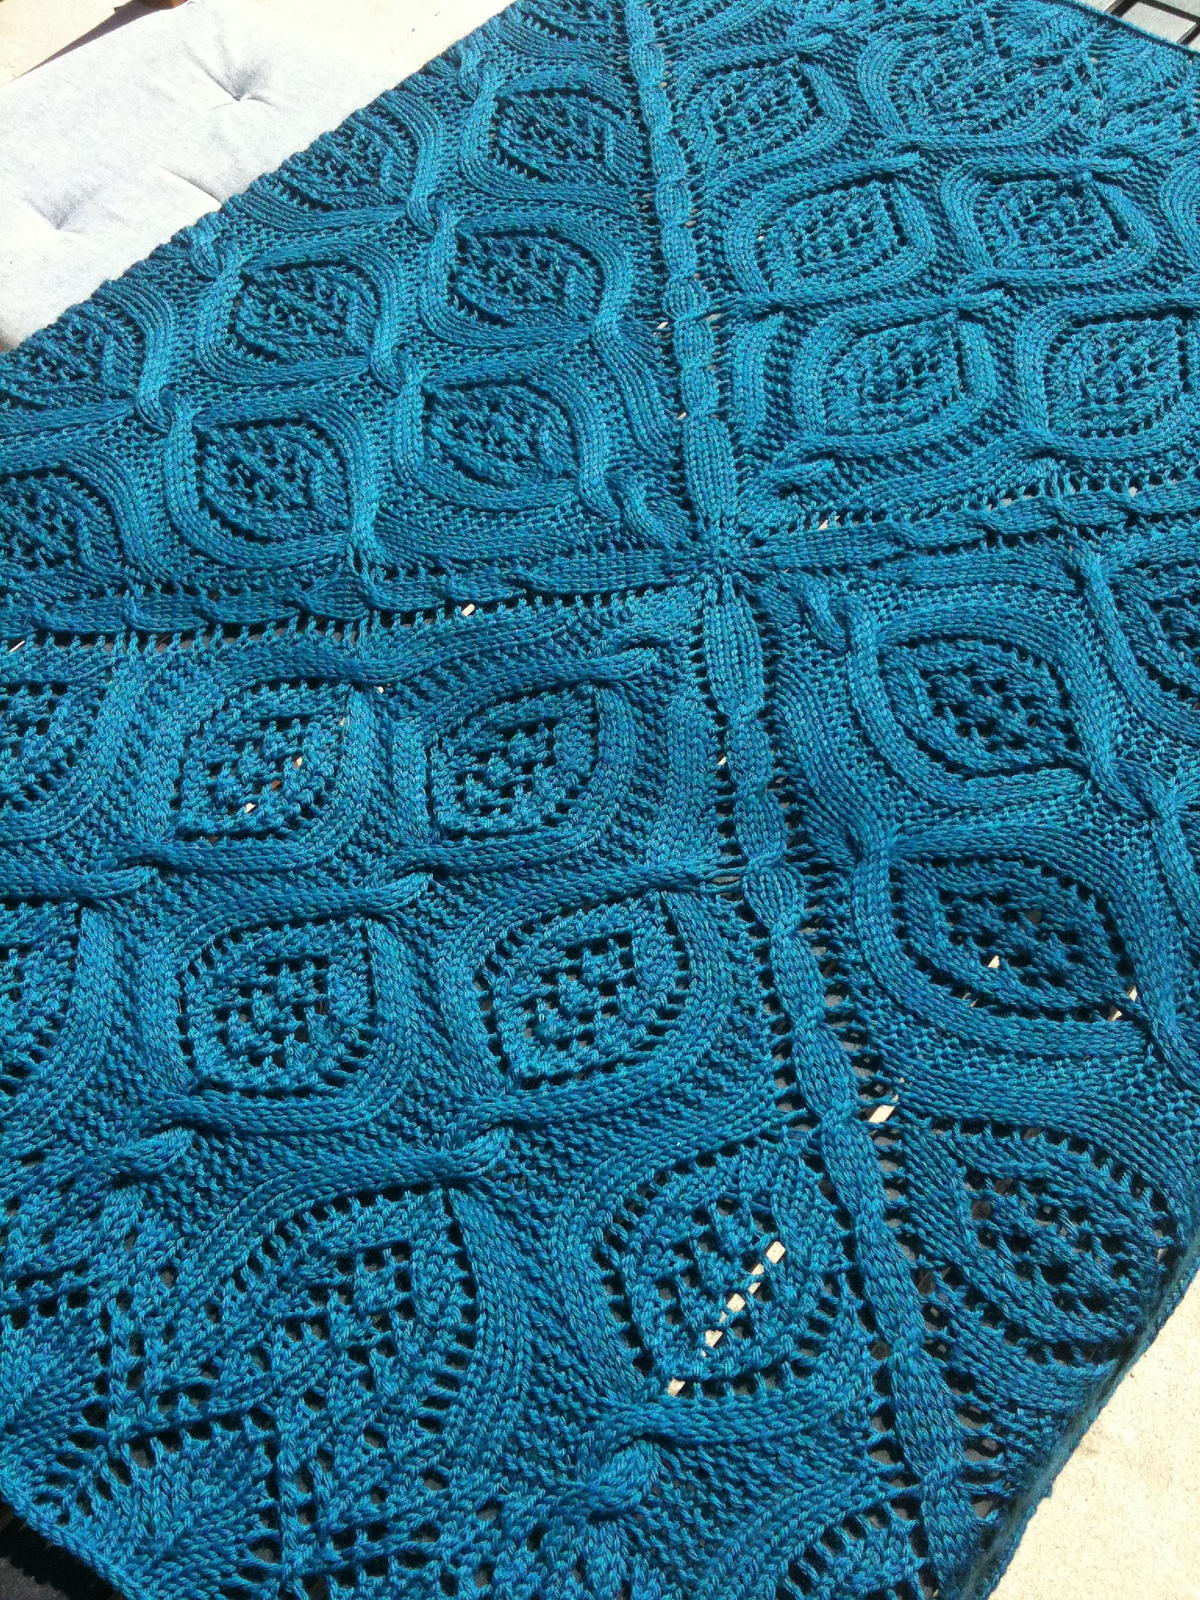 Cable Afghan Knitting Patterns In the Loop Knitting